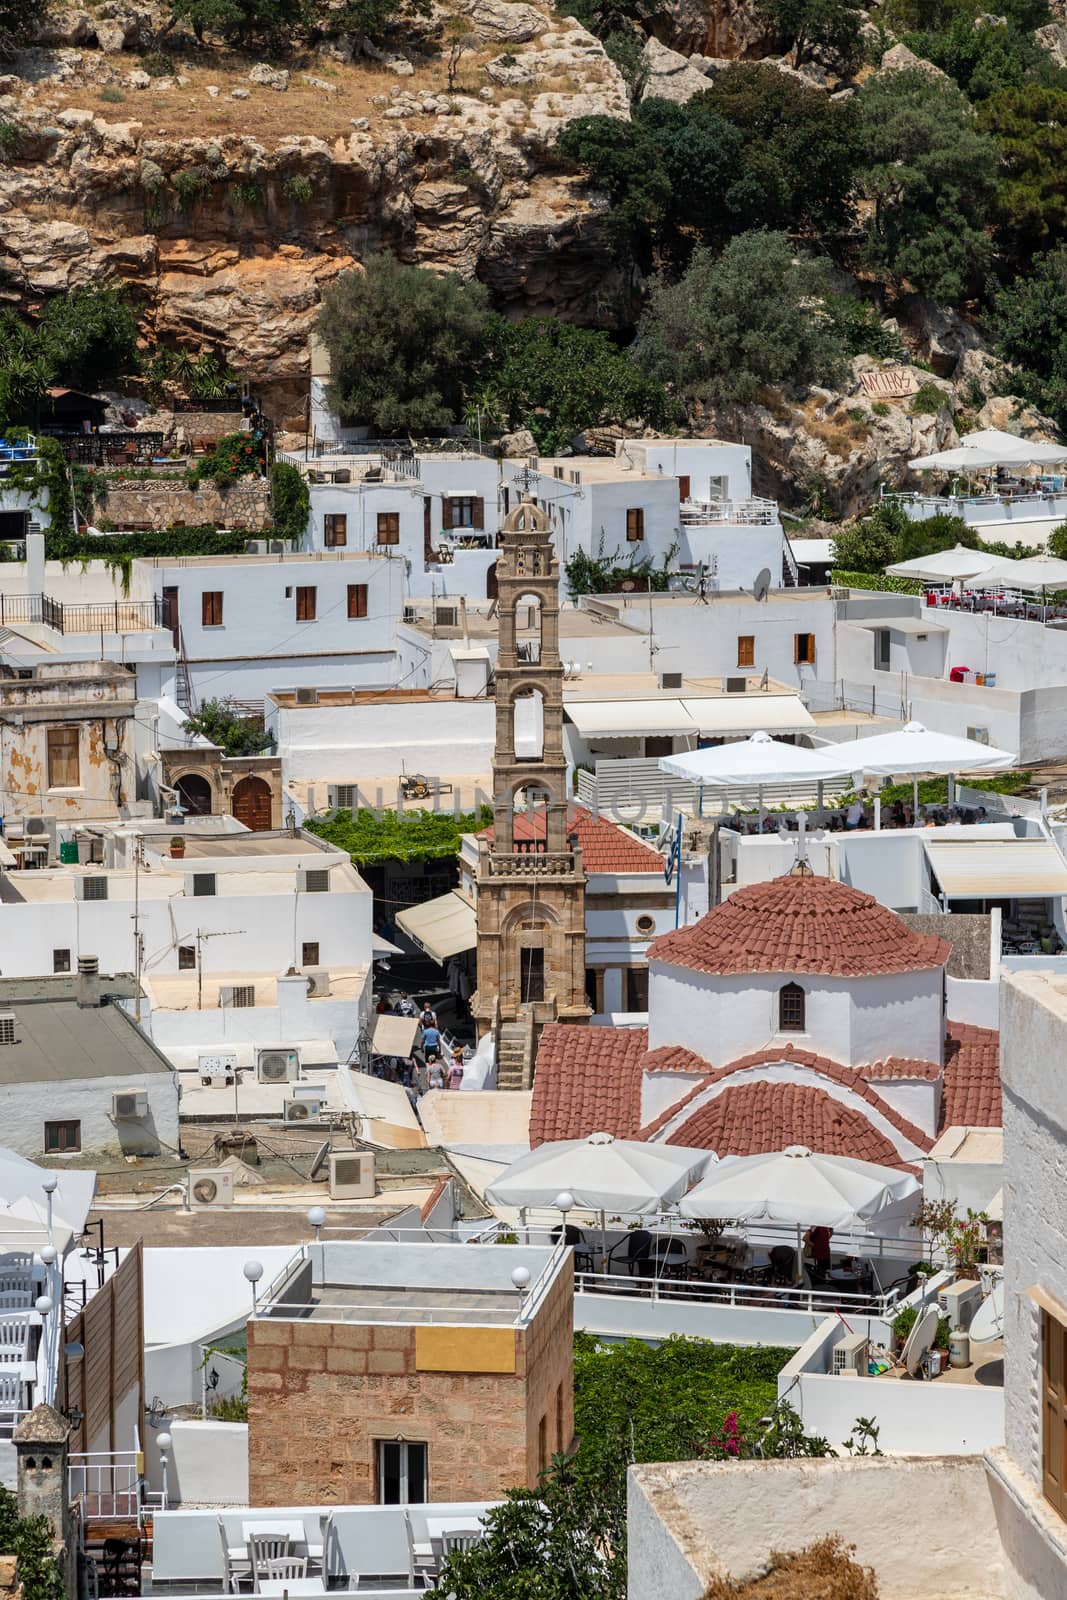 View at the city of Lindos on Greek island Rhodes with white houses and mountain in the background on a sunny day in spring